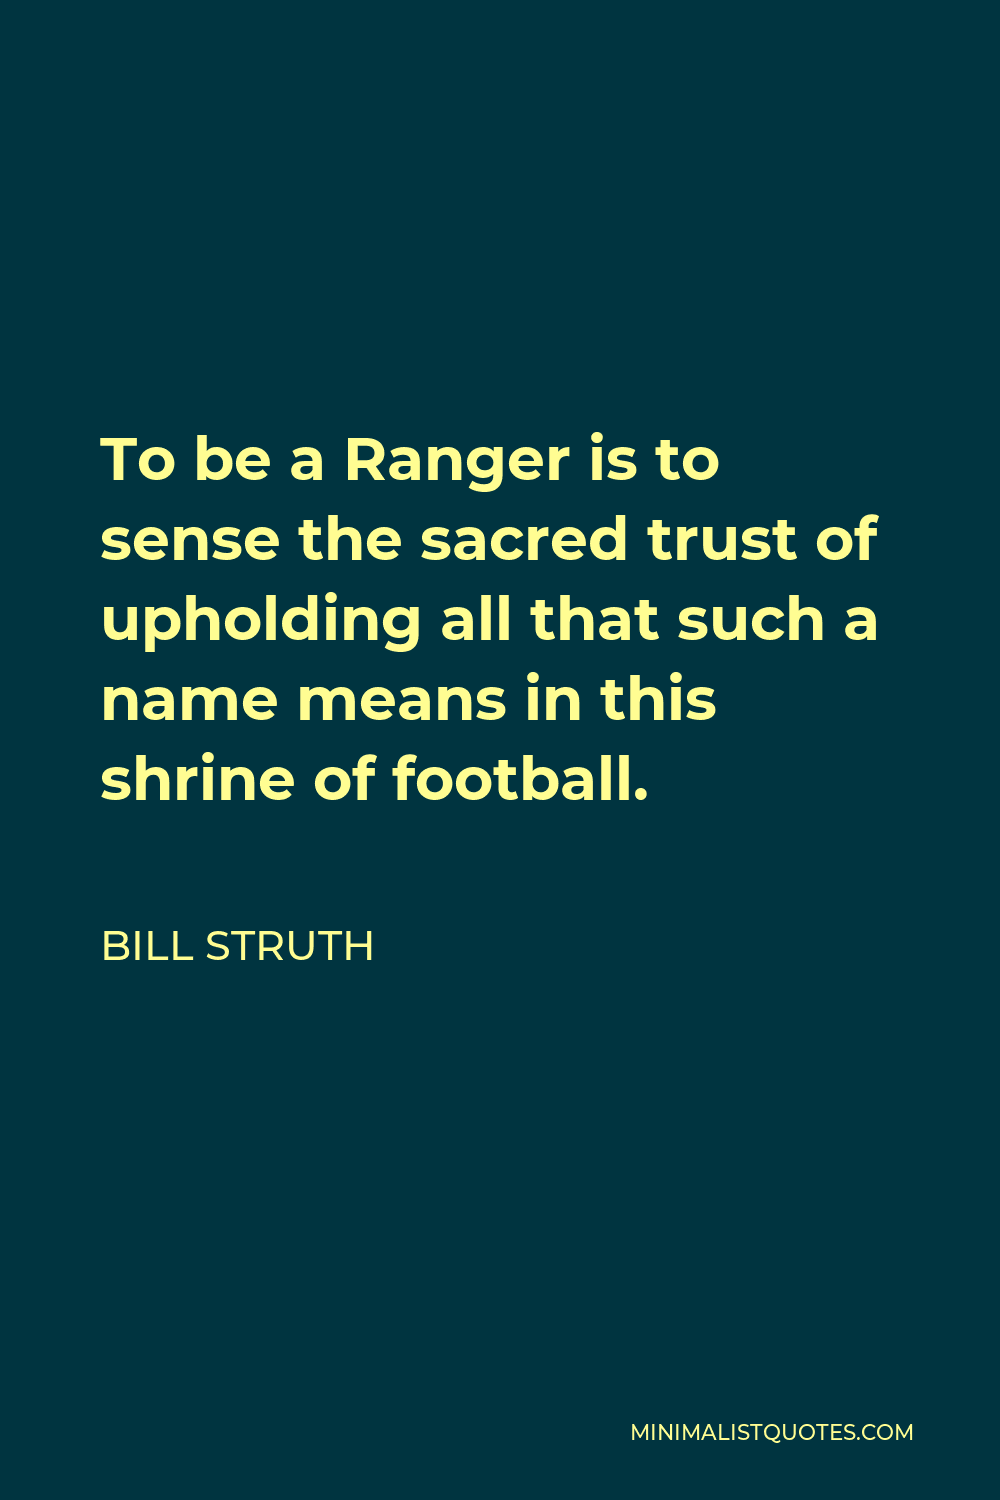 Bill Struth Quote - To be a Ranger is to sense the sacred trust of upholding all that such a name means in this shrine of football.